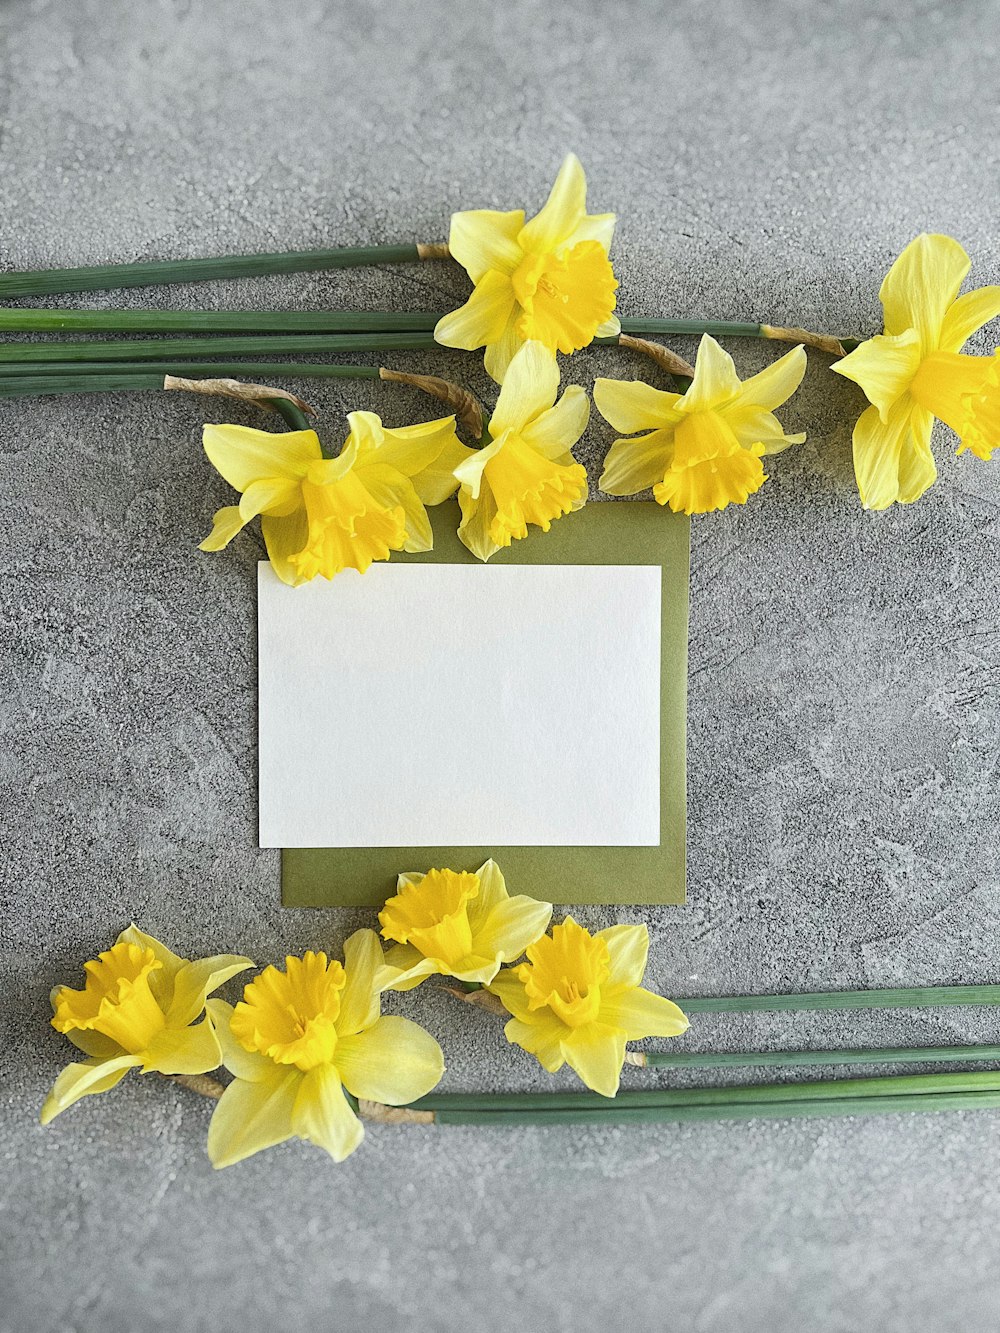 daffodils and a card on a gray surface